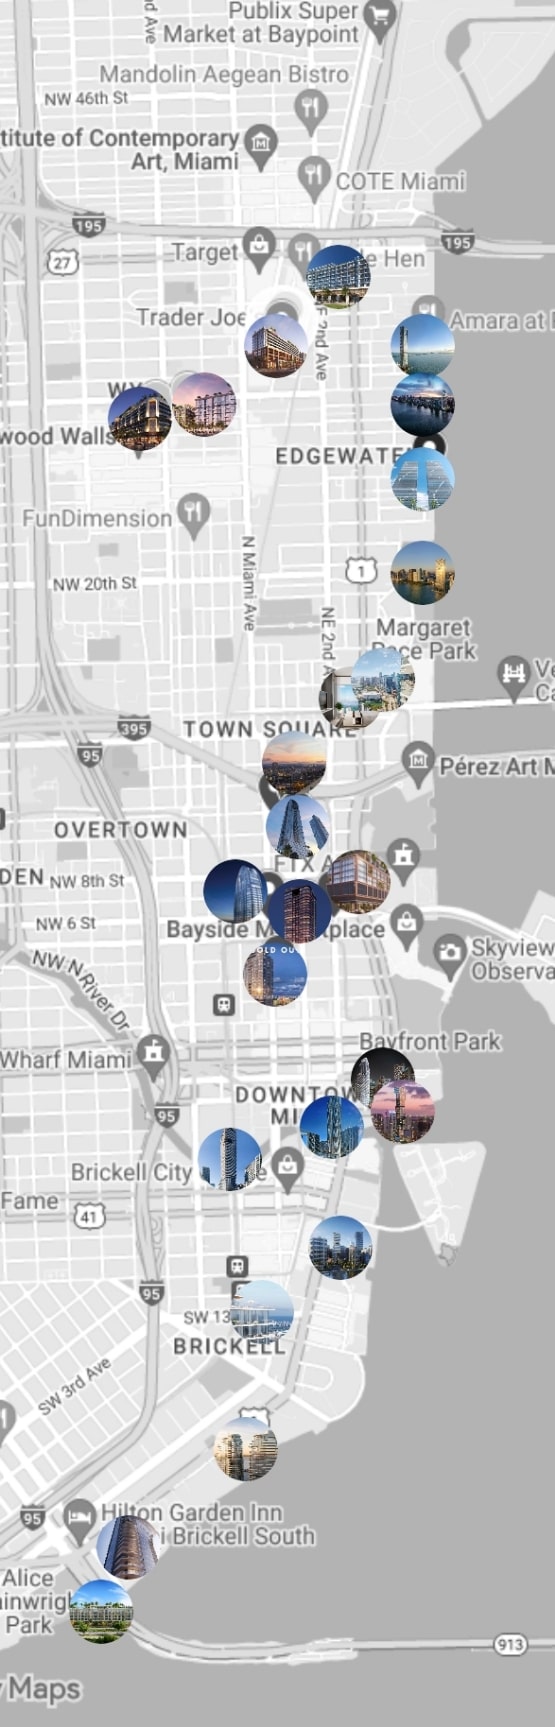 Grayscale map of Downtown Miami